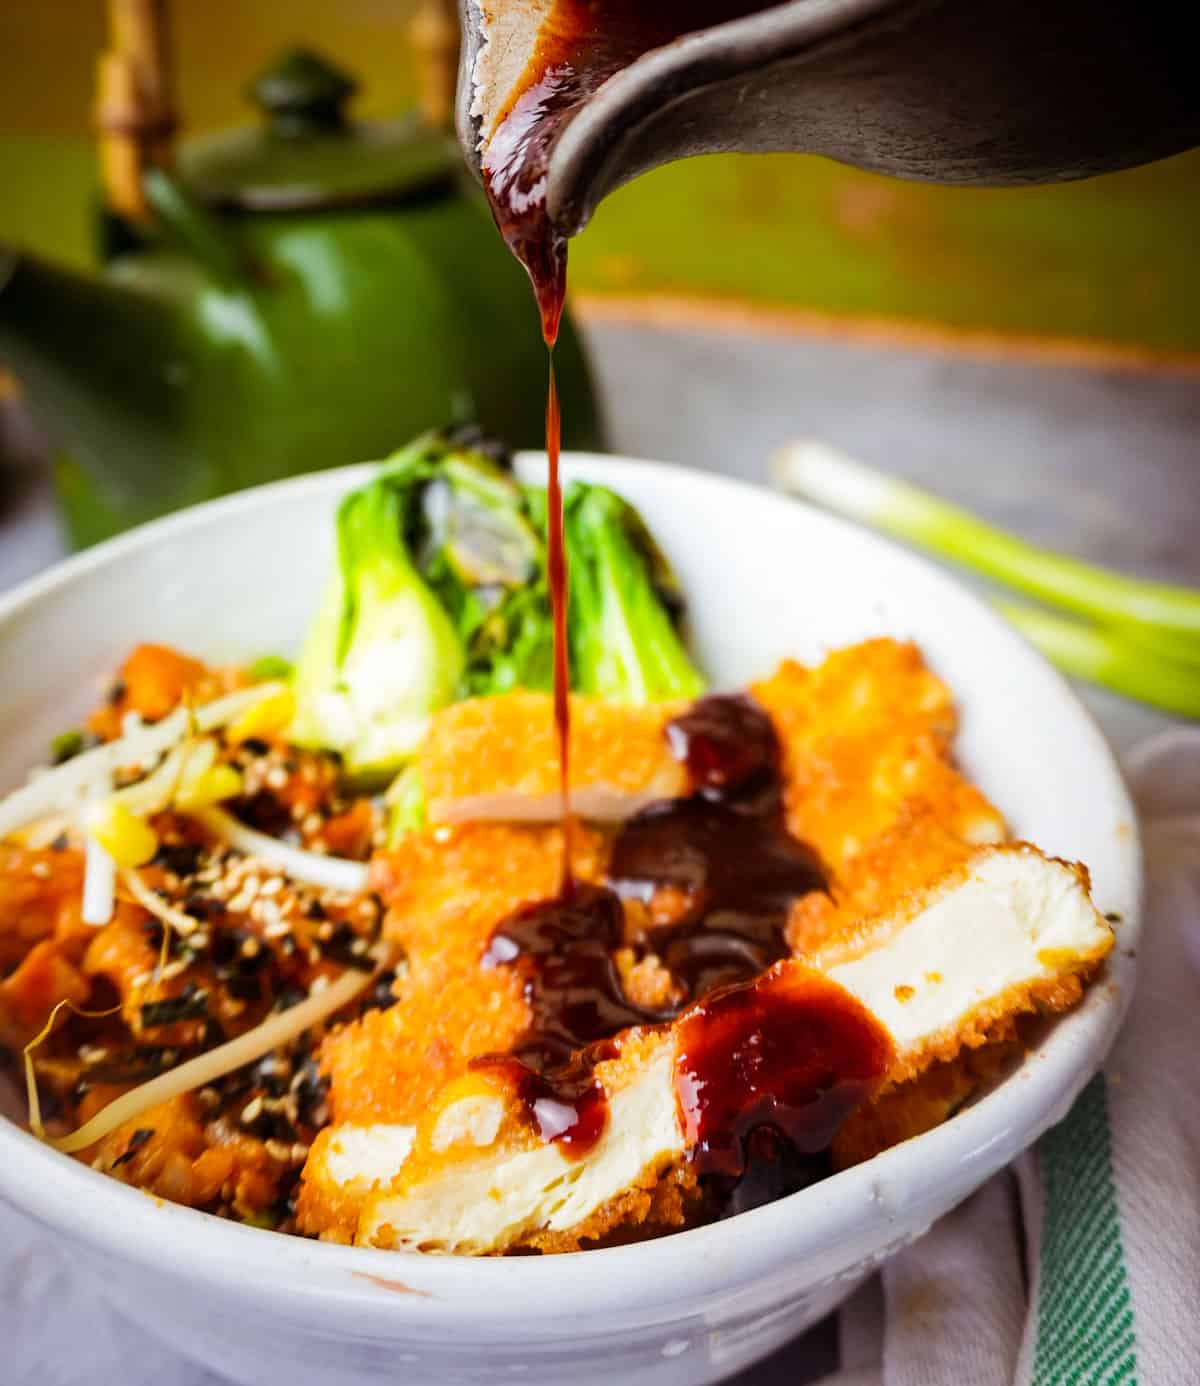 Tofu katsu in a white bowl getting tonkatsu sauce drizzled on it from a pitcher. scallions and tea kettle behind it.